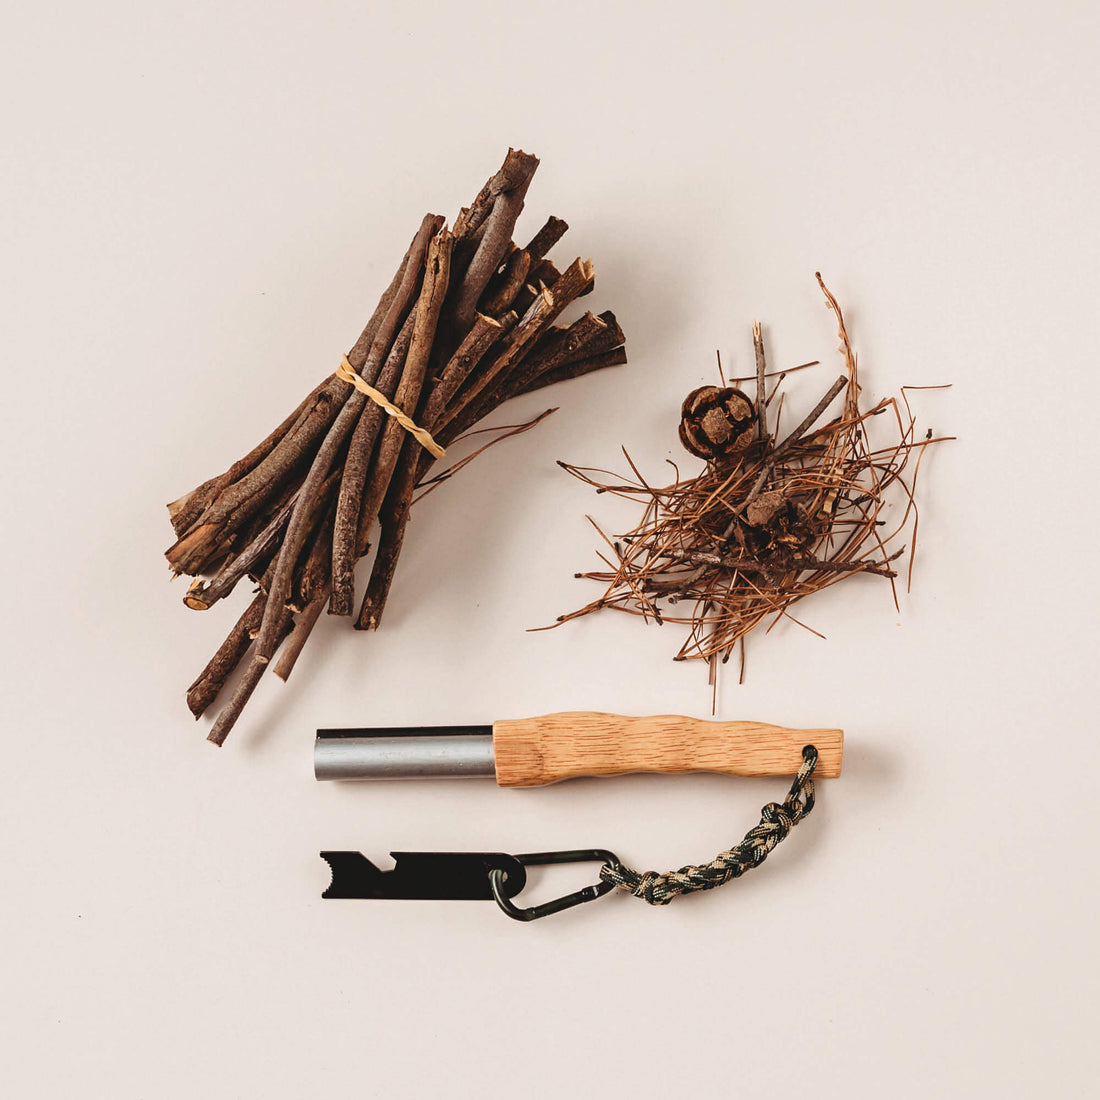 Flatlay of fire starter with wooden handle with kindling made by Your Wild Books